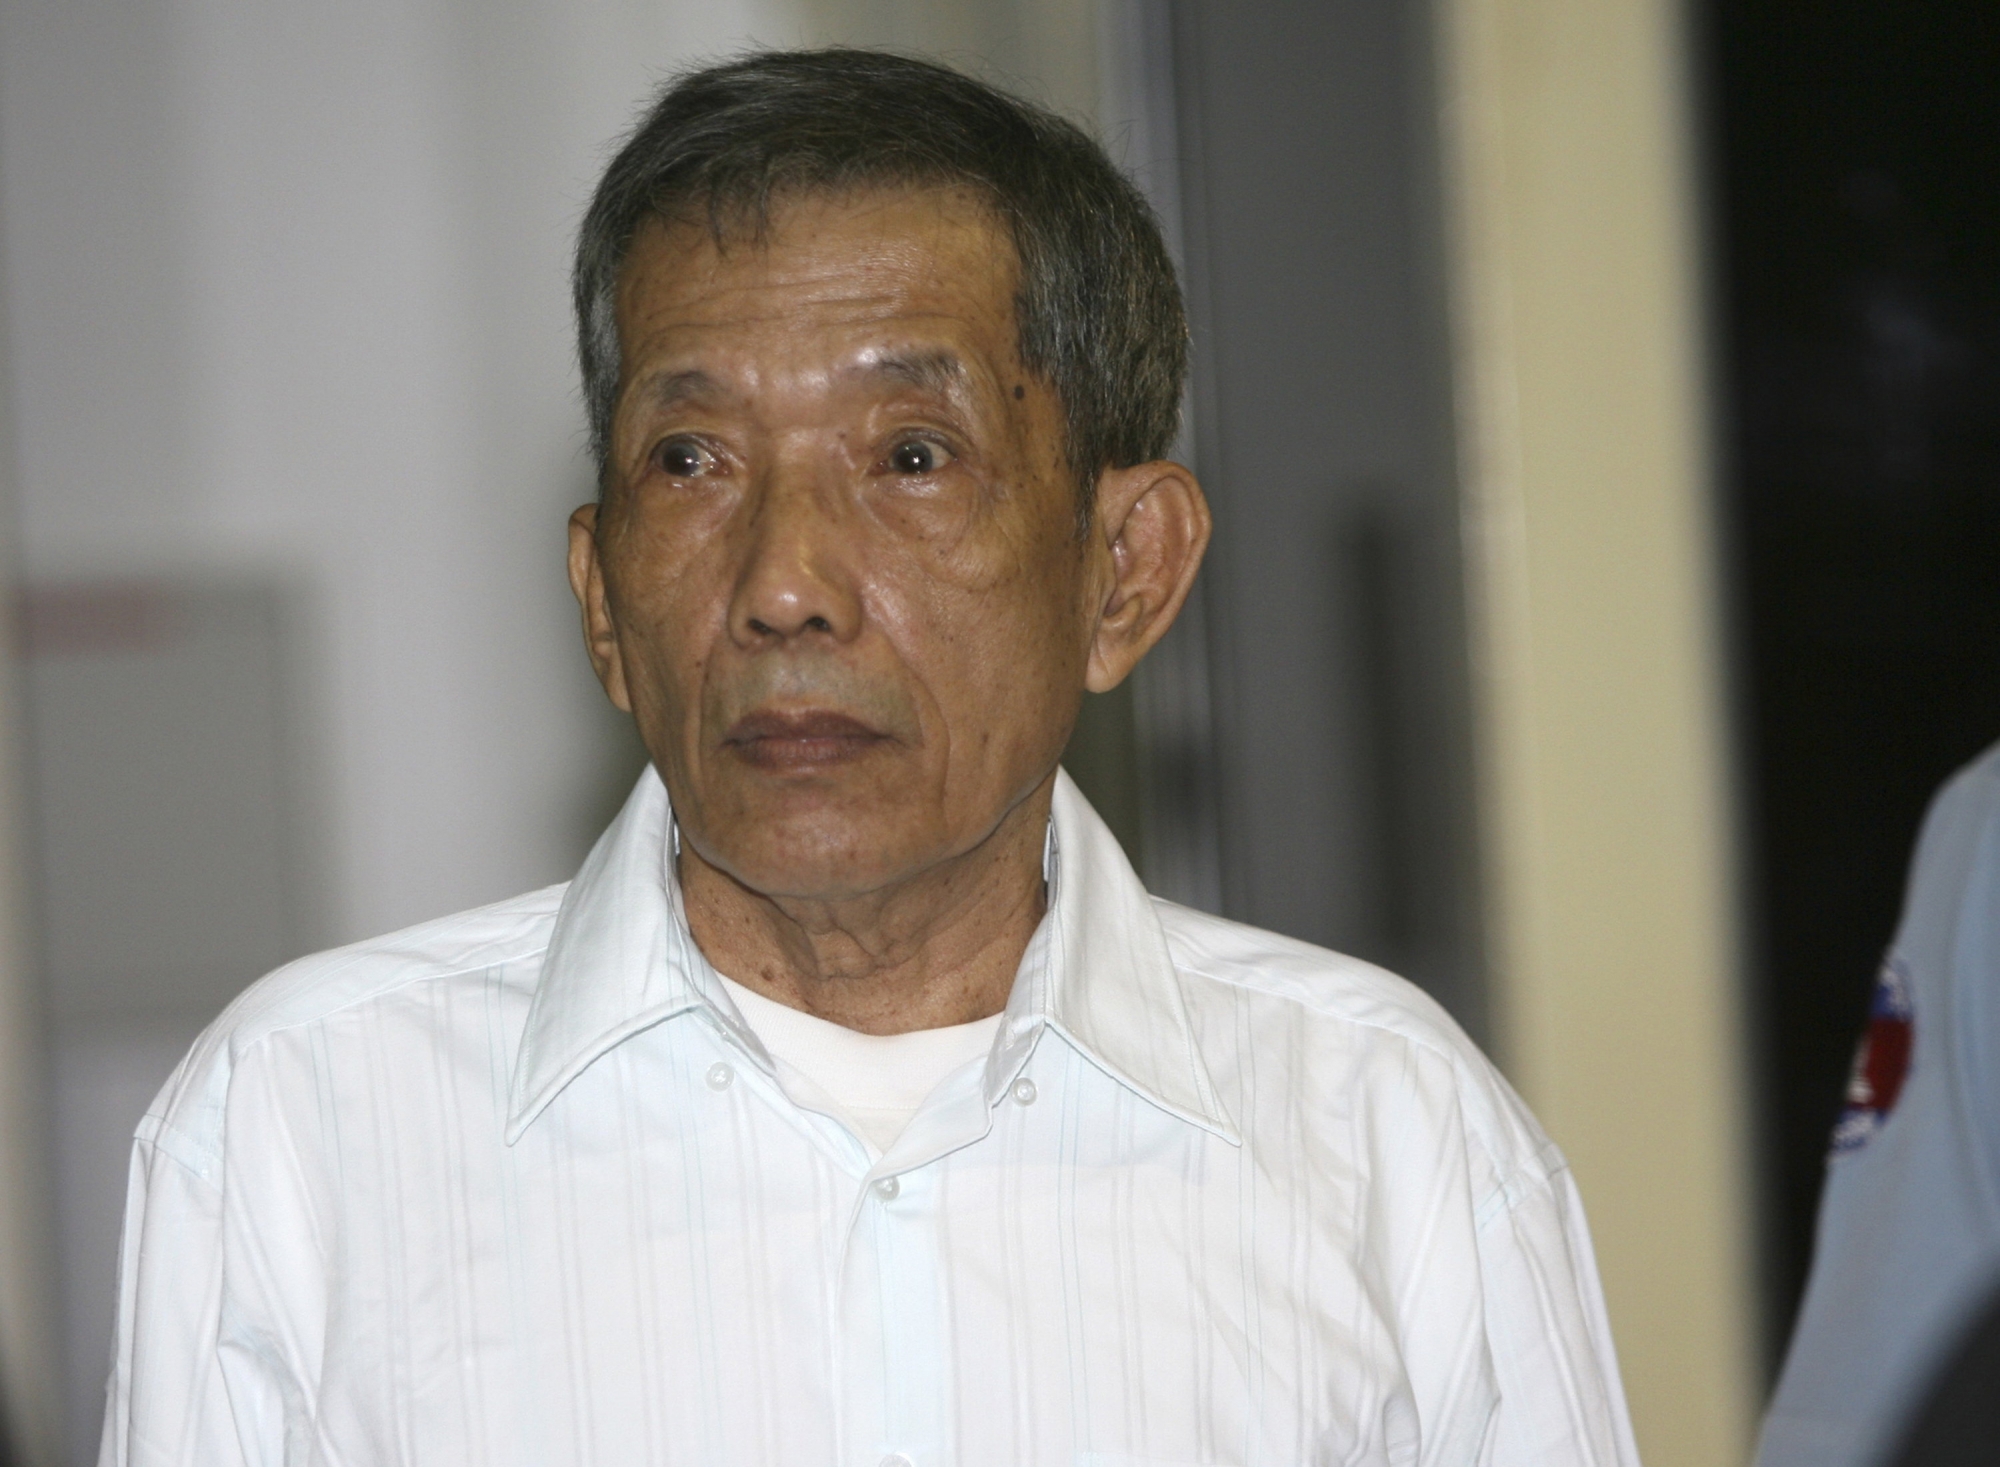 FILE - In this March 30, 2020, file photo, former Khmer Rouge prison chief Kaing Guek Eav, also know as Duch, looks on during the first day of a U.N.-backed tribunal in Phnom Penh, Cambodia. The Khmer Rouge‚Äôs chief jailer, who admitted overseeing the torture and killings of as many as 16,000 Cambodians while running the regime‚Äôs most notorious prison, died at a hospital in Cambodia early Wednesday morning, Sept. 2, 2020. Kaing Guek Eav, known as Duch, was 77 and had been serving a life prison term for war crimes and crimes against humanity. (Mak Remissa/Pool Photo via AP, File) Kaing Guek Eav Duch ArcInfo